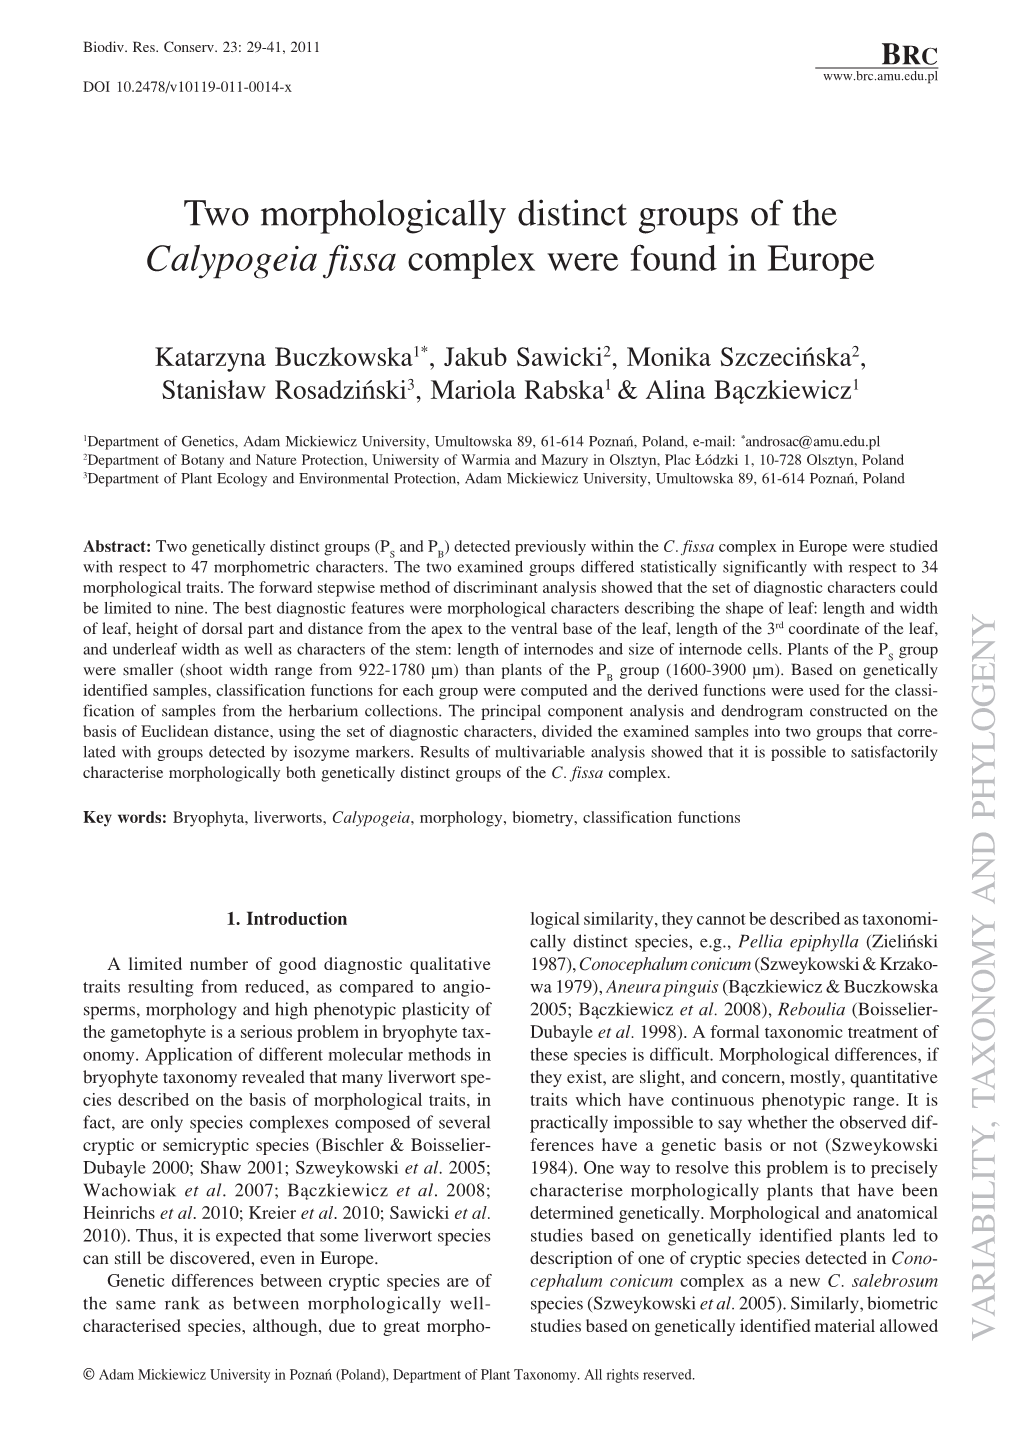 Two Morphologically Distinct Groups of the Calypogeia Fissa Complex Were Found in Europe